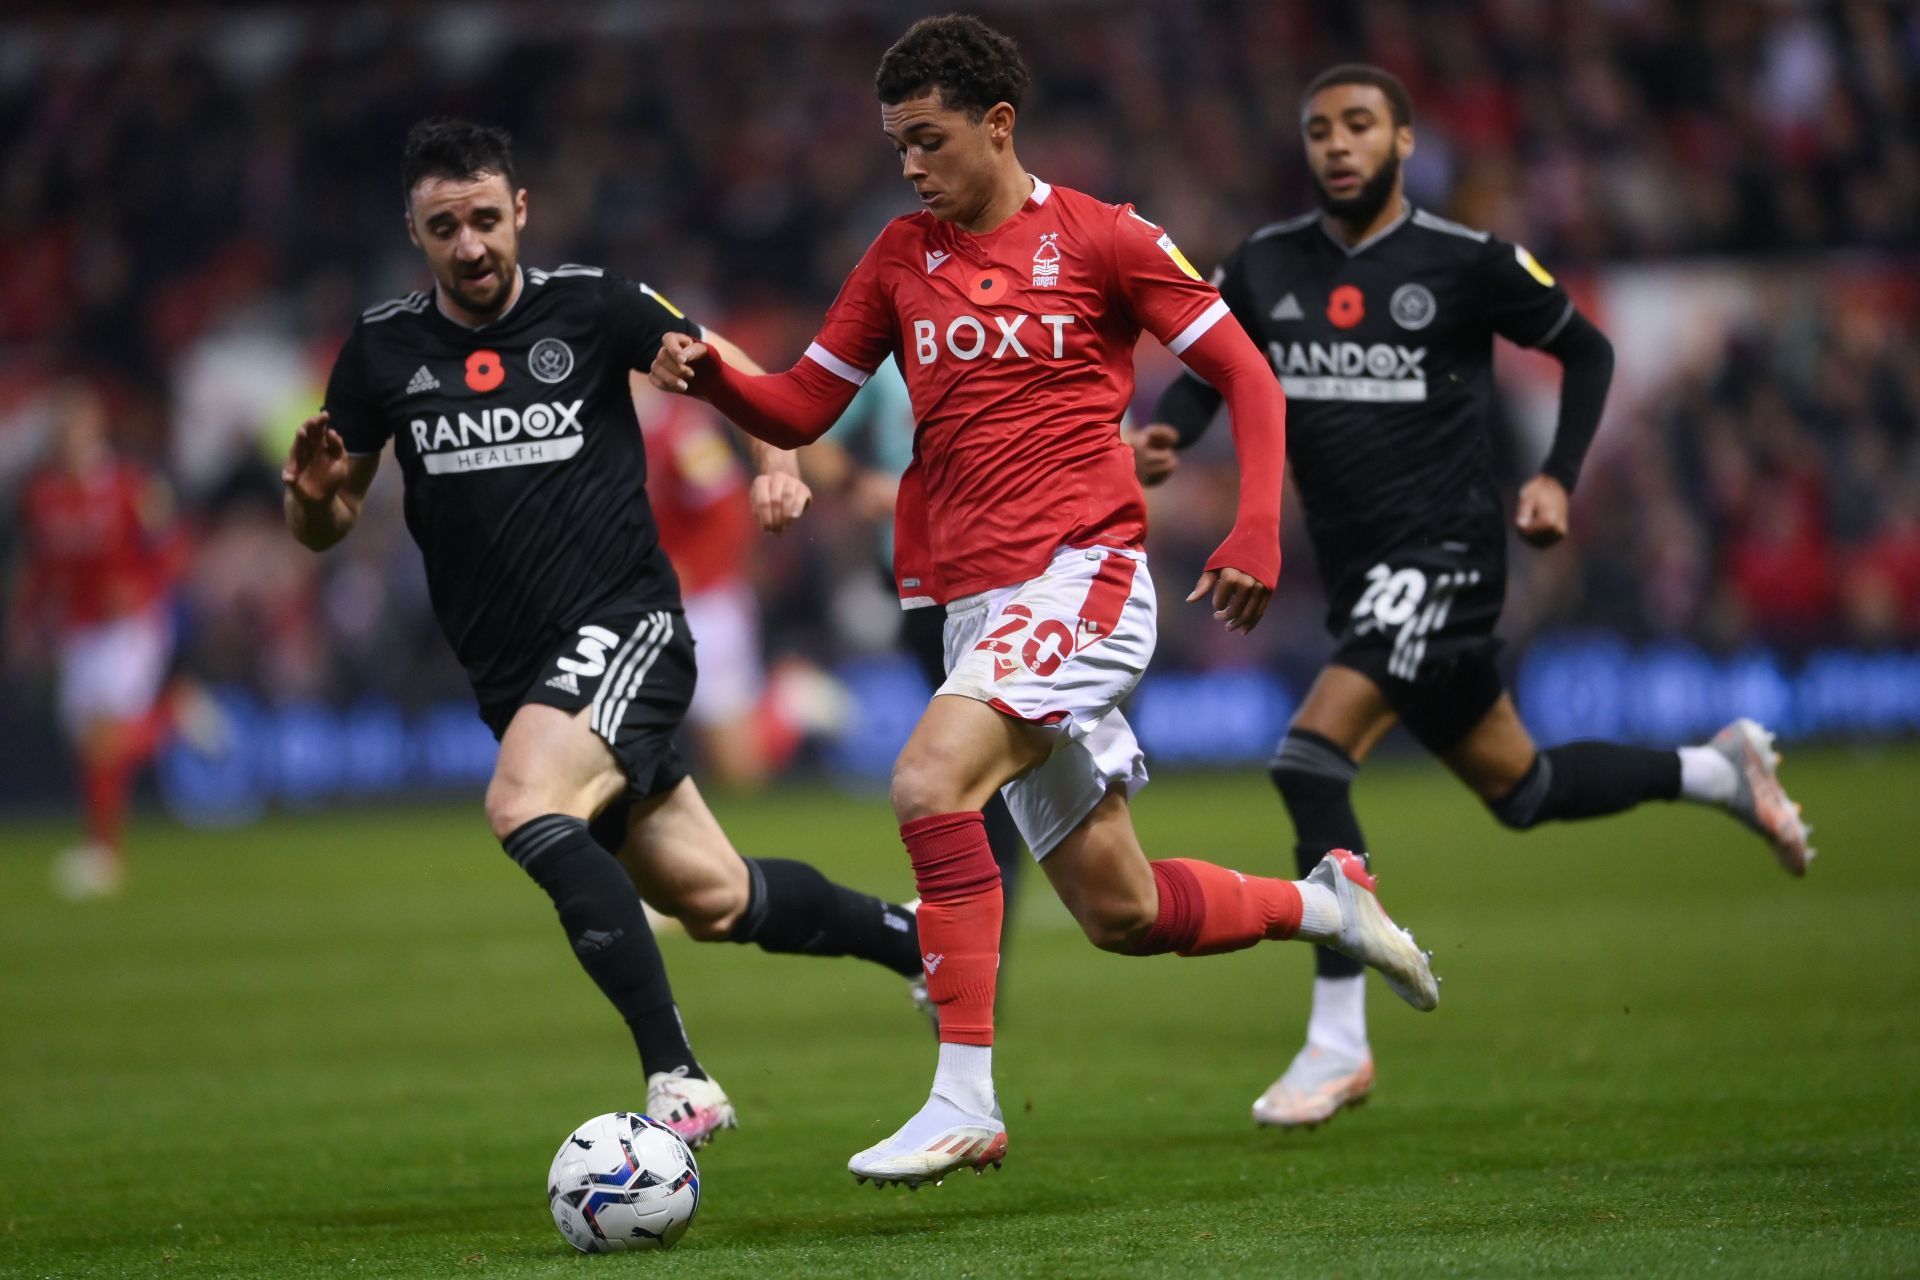 Sheffield United lock horns with Nottingham Forest on Friday